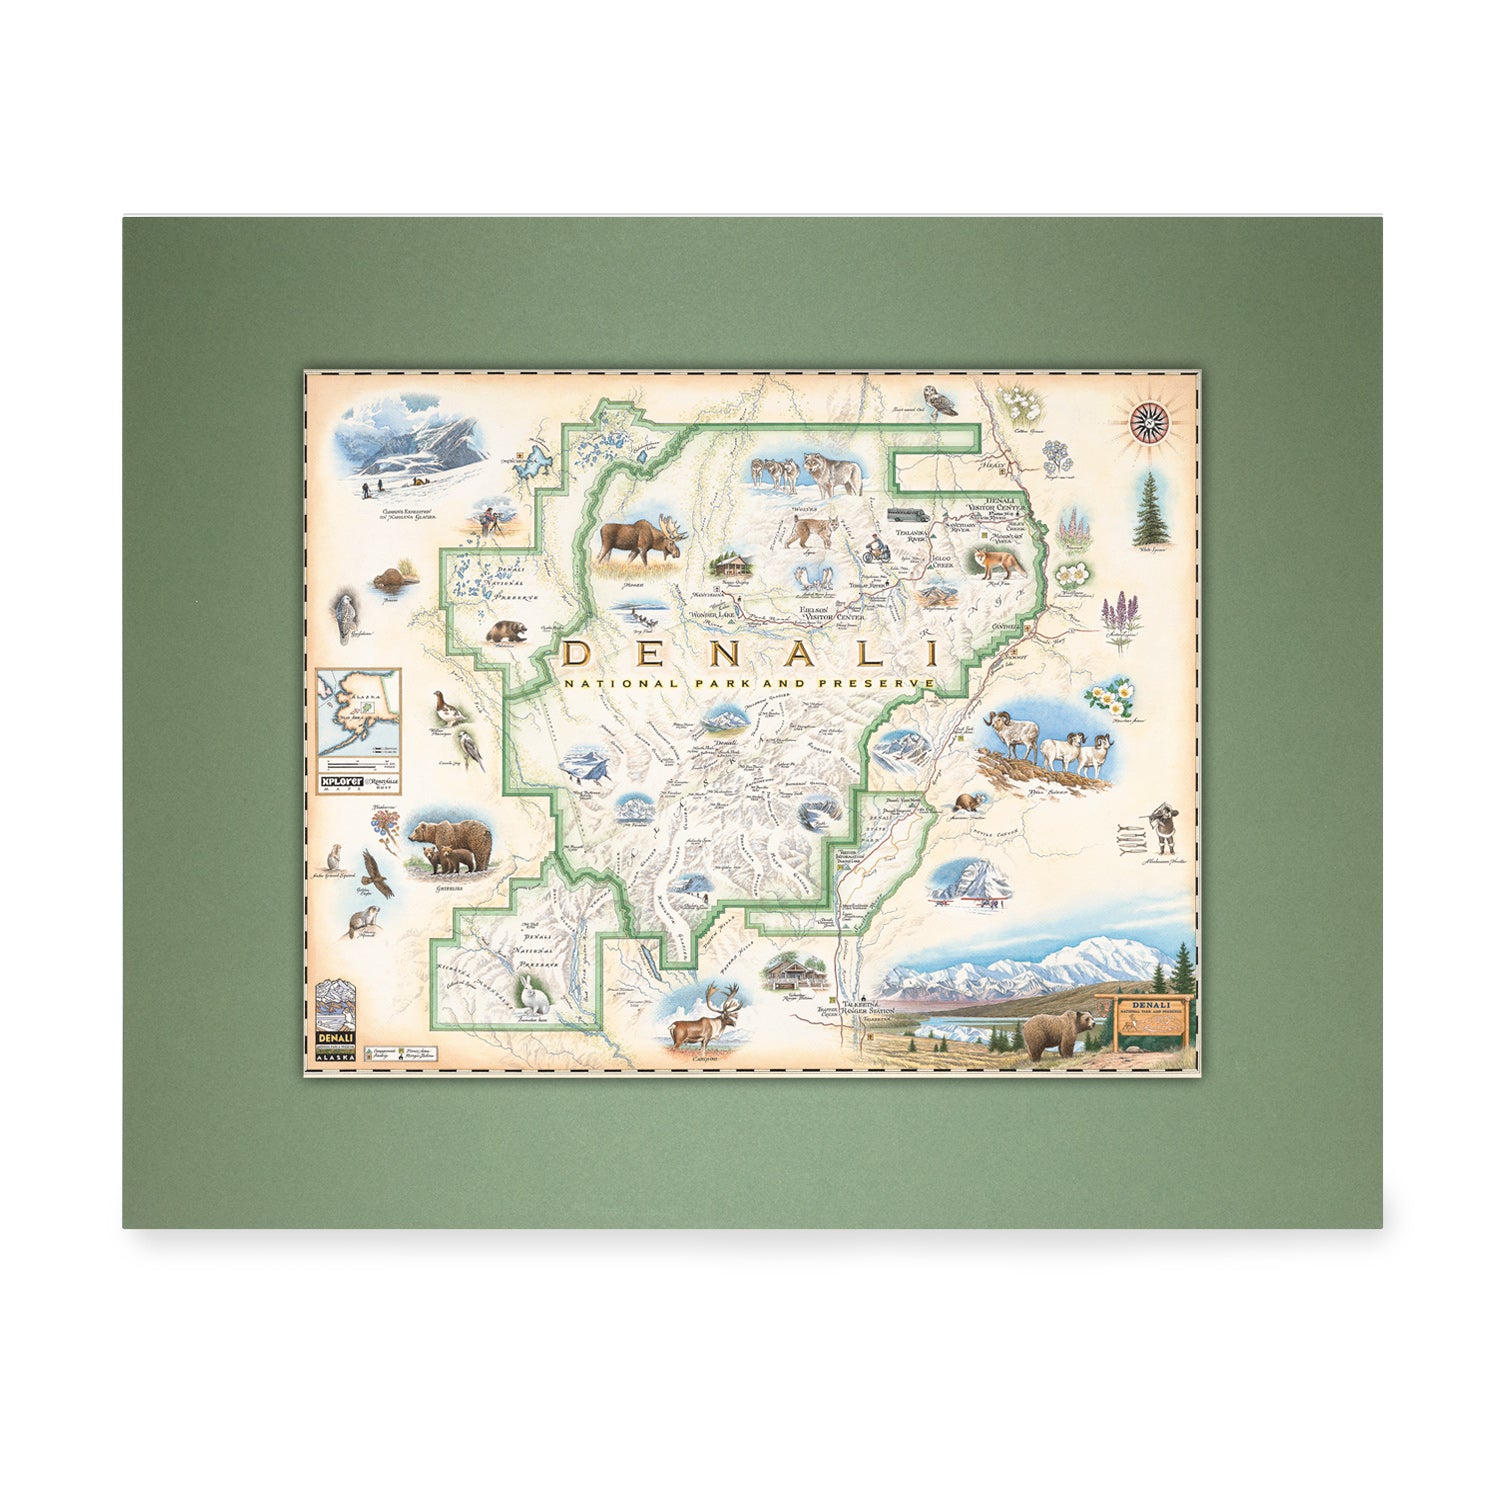 Green pre-matted Denali National Park mini-map in earth tones of beige and green. It features illustrations of the major flora and fauna found in the park, such as grizzly bears, wolverines, moose, lynx, Dall sheep, and many more. Major attractions are illustrated on the map, like the Talkeetna Visitor Center, Denali Visitor Center, Ruth Glacier, and Kahiltna Glacier. 